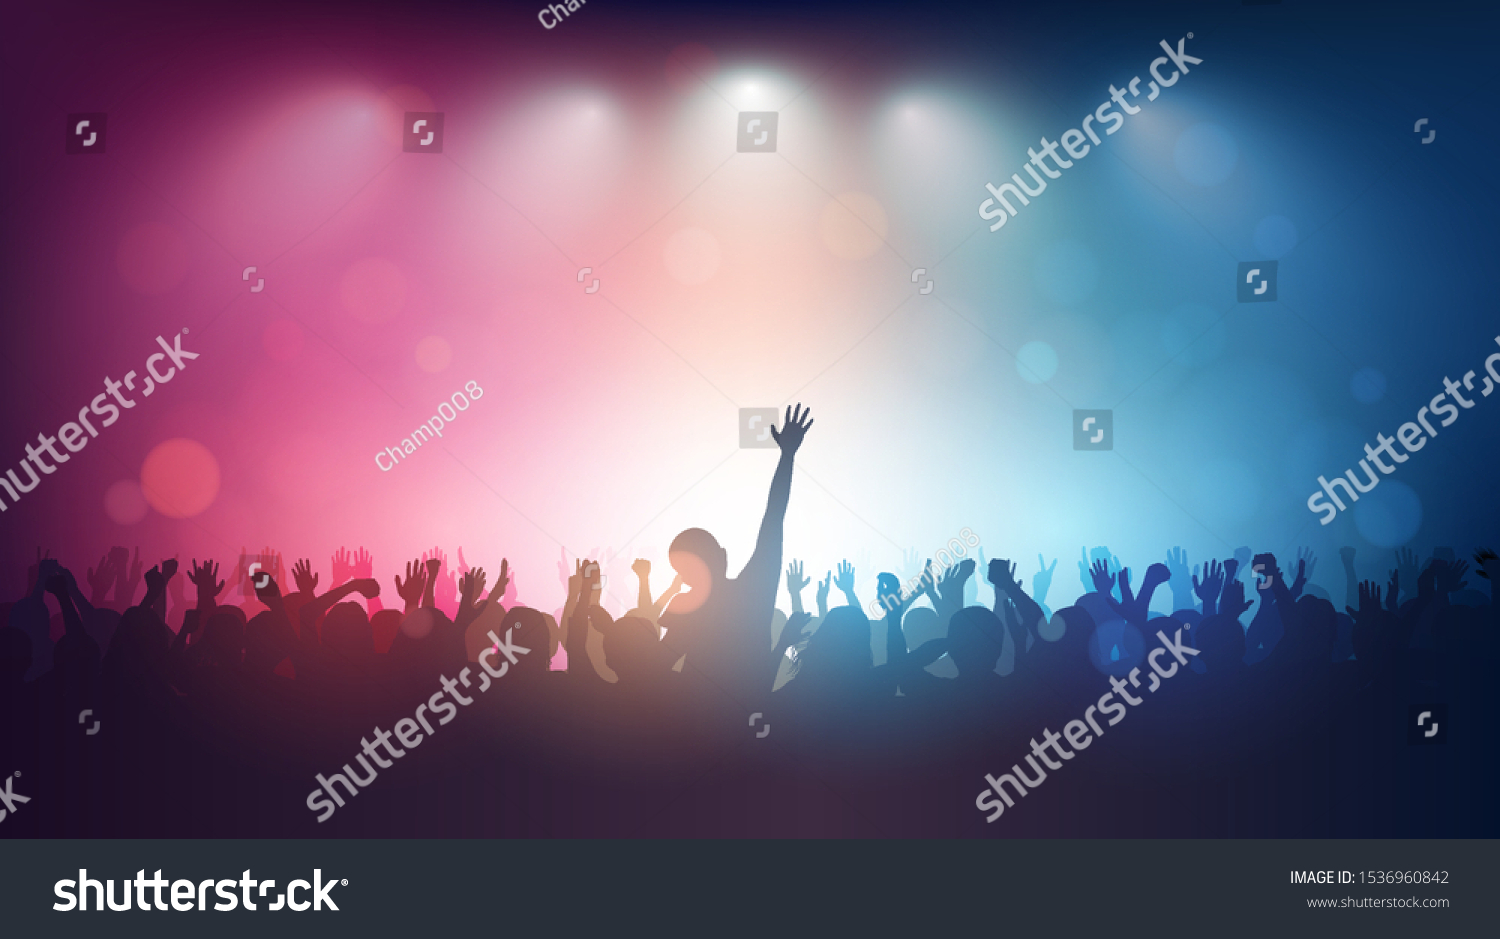 Silhouette of people raise hand up in music concert with red and blue color spotlight on stage background #1536960842